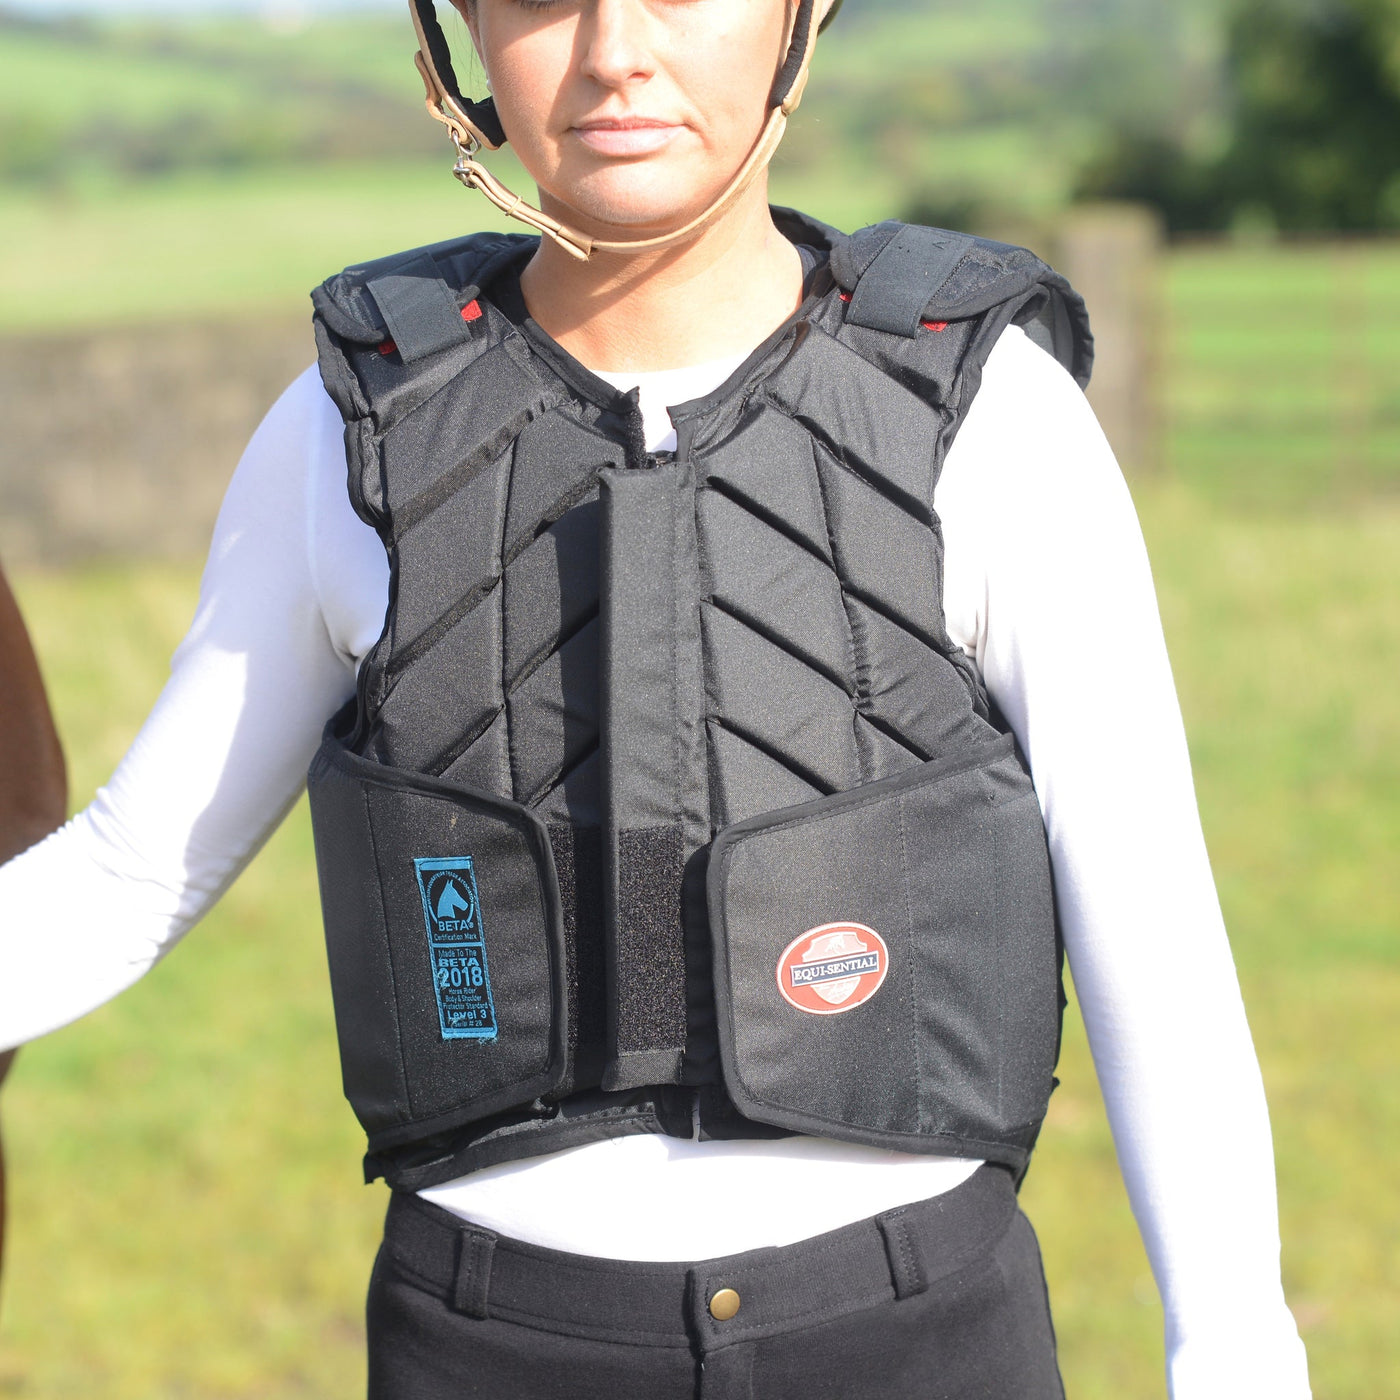 EQUISENTIAL FLEXI BODY PROTECTOR